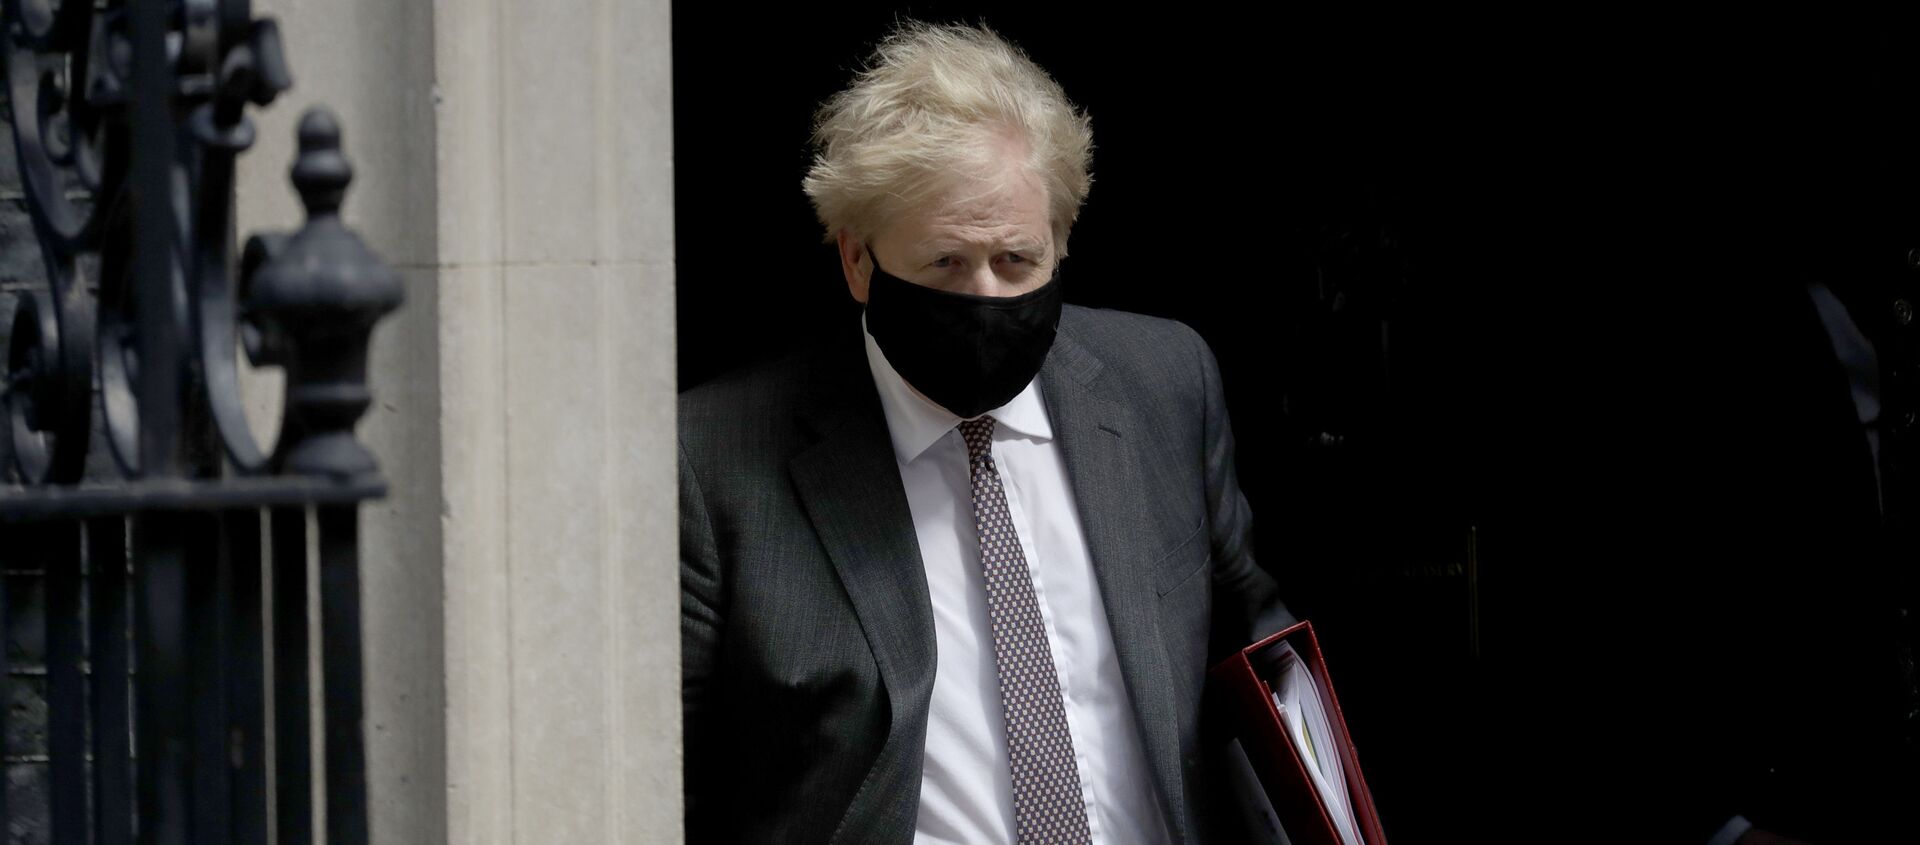 British Prime Minister Boris Johnson leaves 10 Downing Street in London, to attend the weekly Prime Minister's Questions at the Houses of Parliament, in London, Wednesday, April 21, 2021.  - Sputnik International, 1920